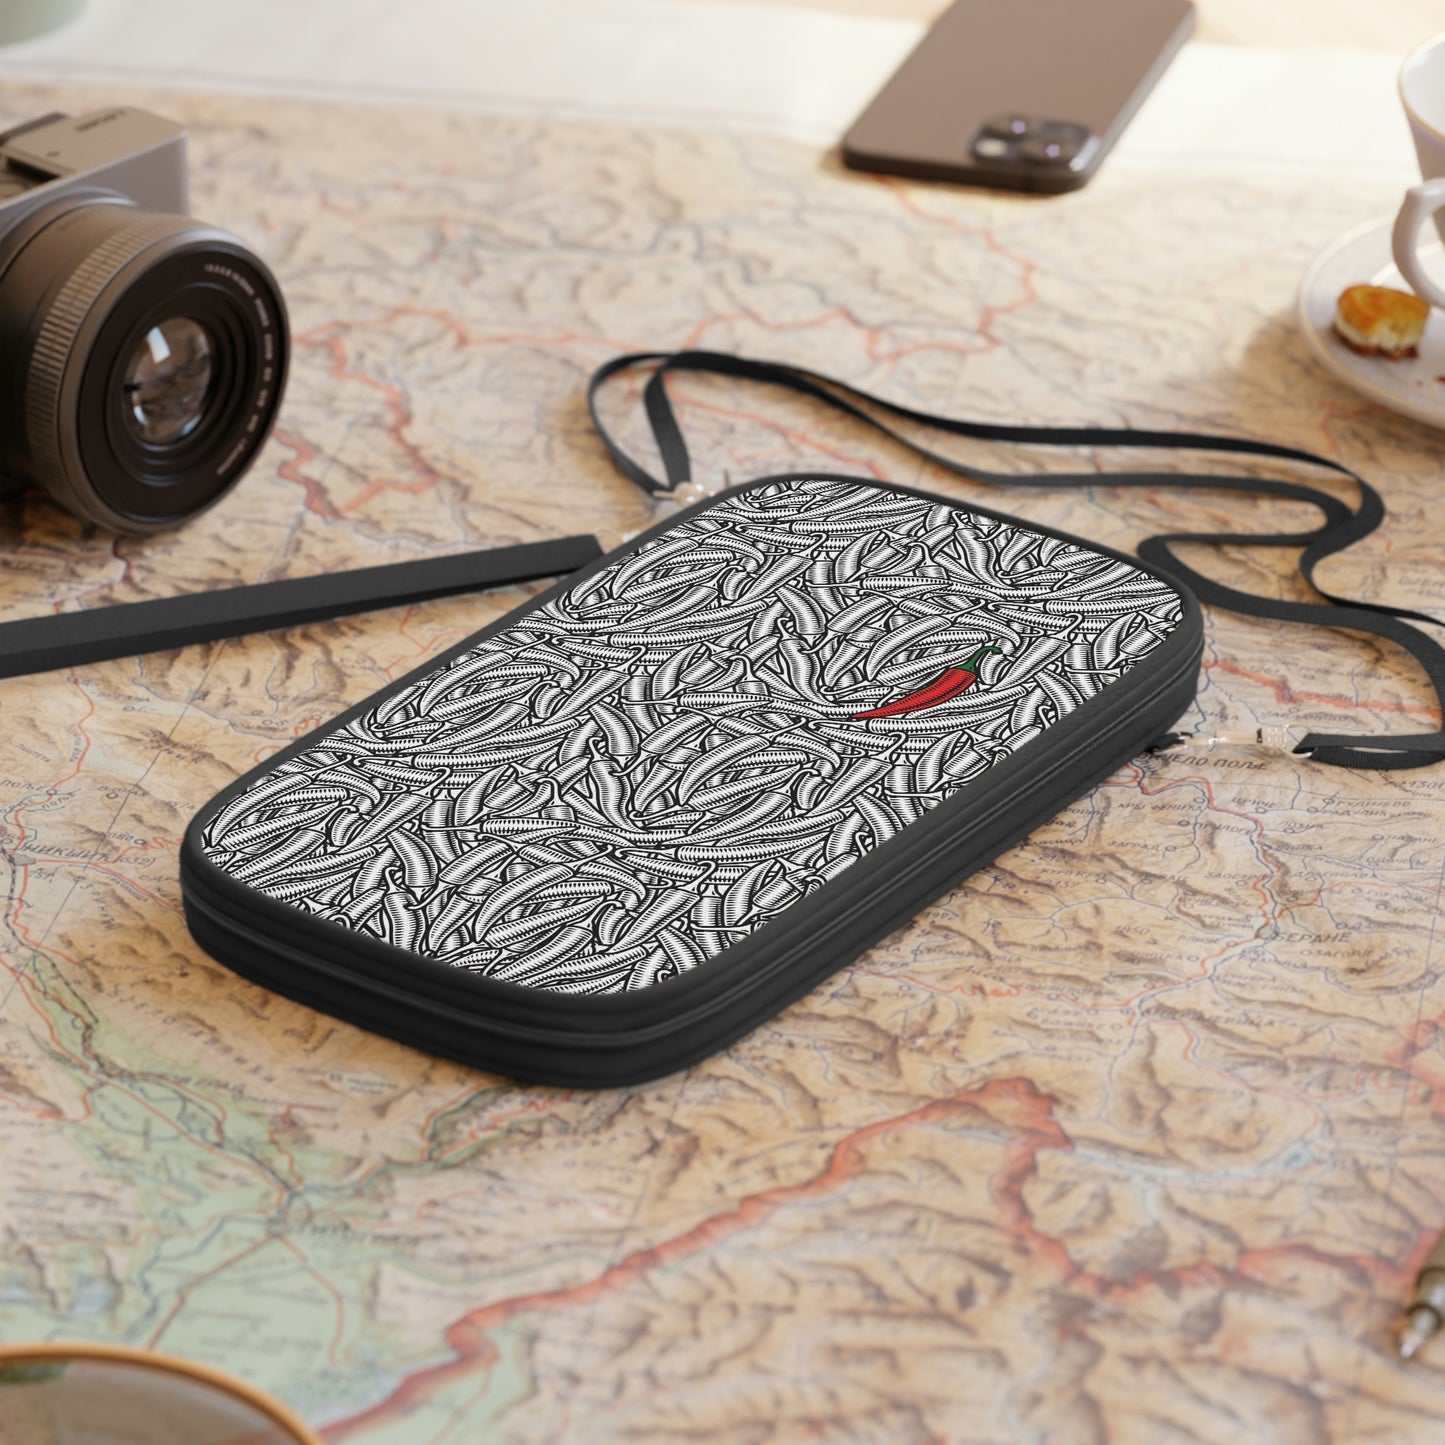 Add a little heat to your travels2 - Passport Wallet